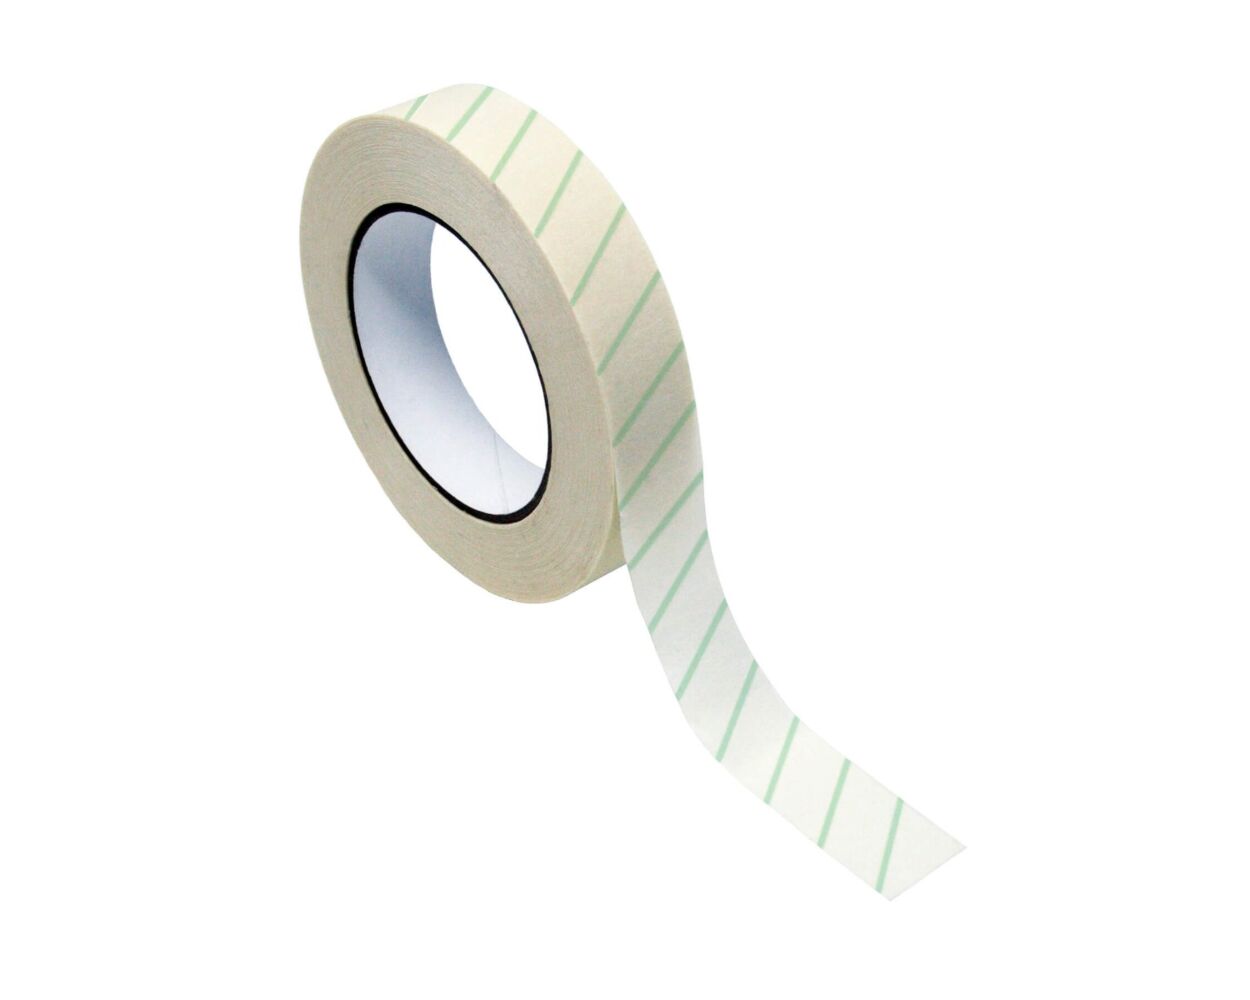 Autoclave Tape Products, Supplies and Equipment